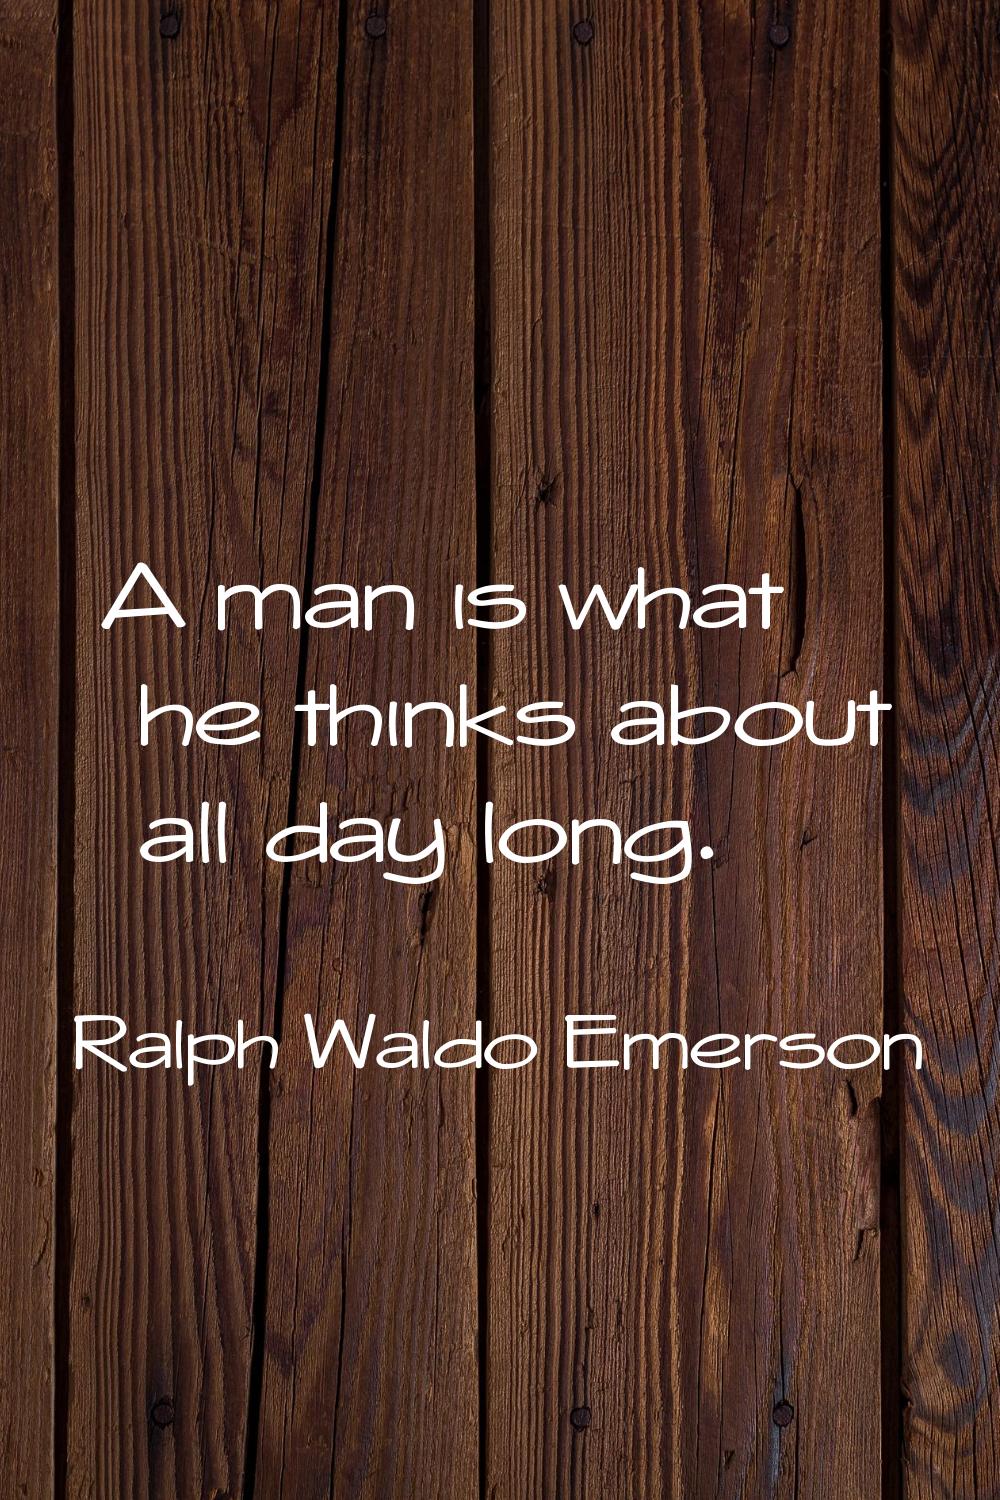 A man is what he thinks about all day long.